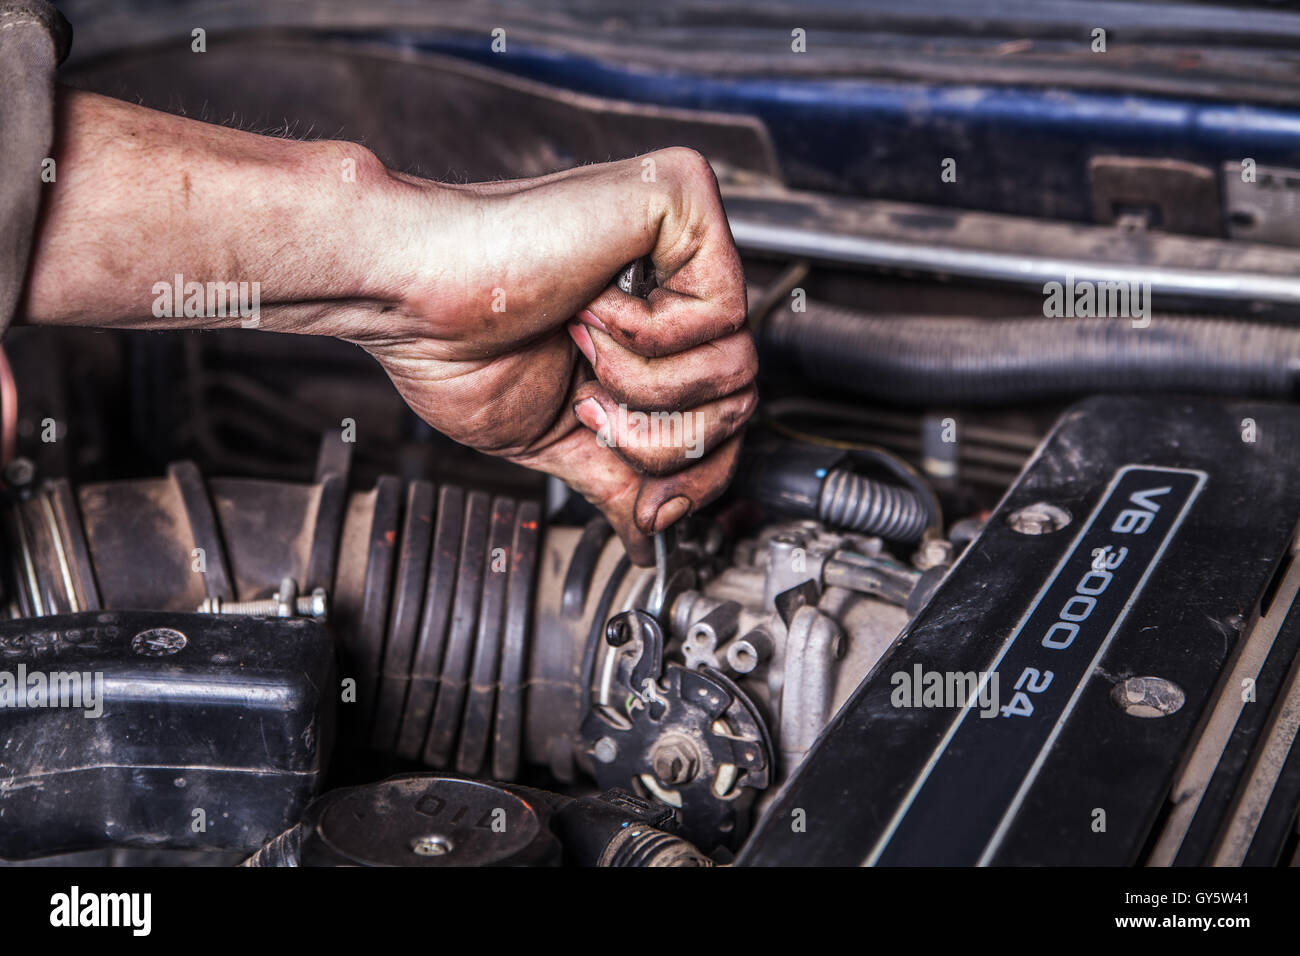 Working men with dirty hands and tools Stock Photo